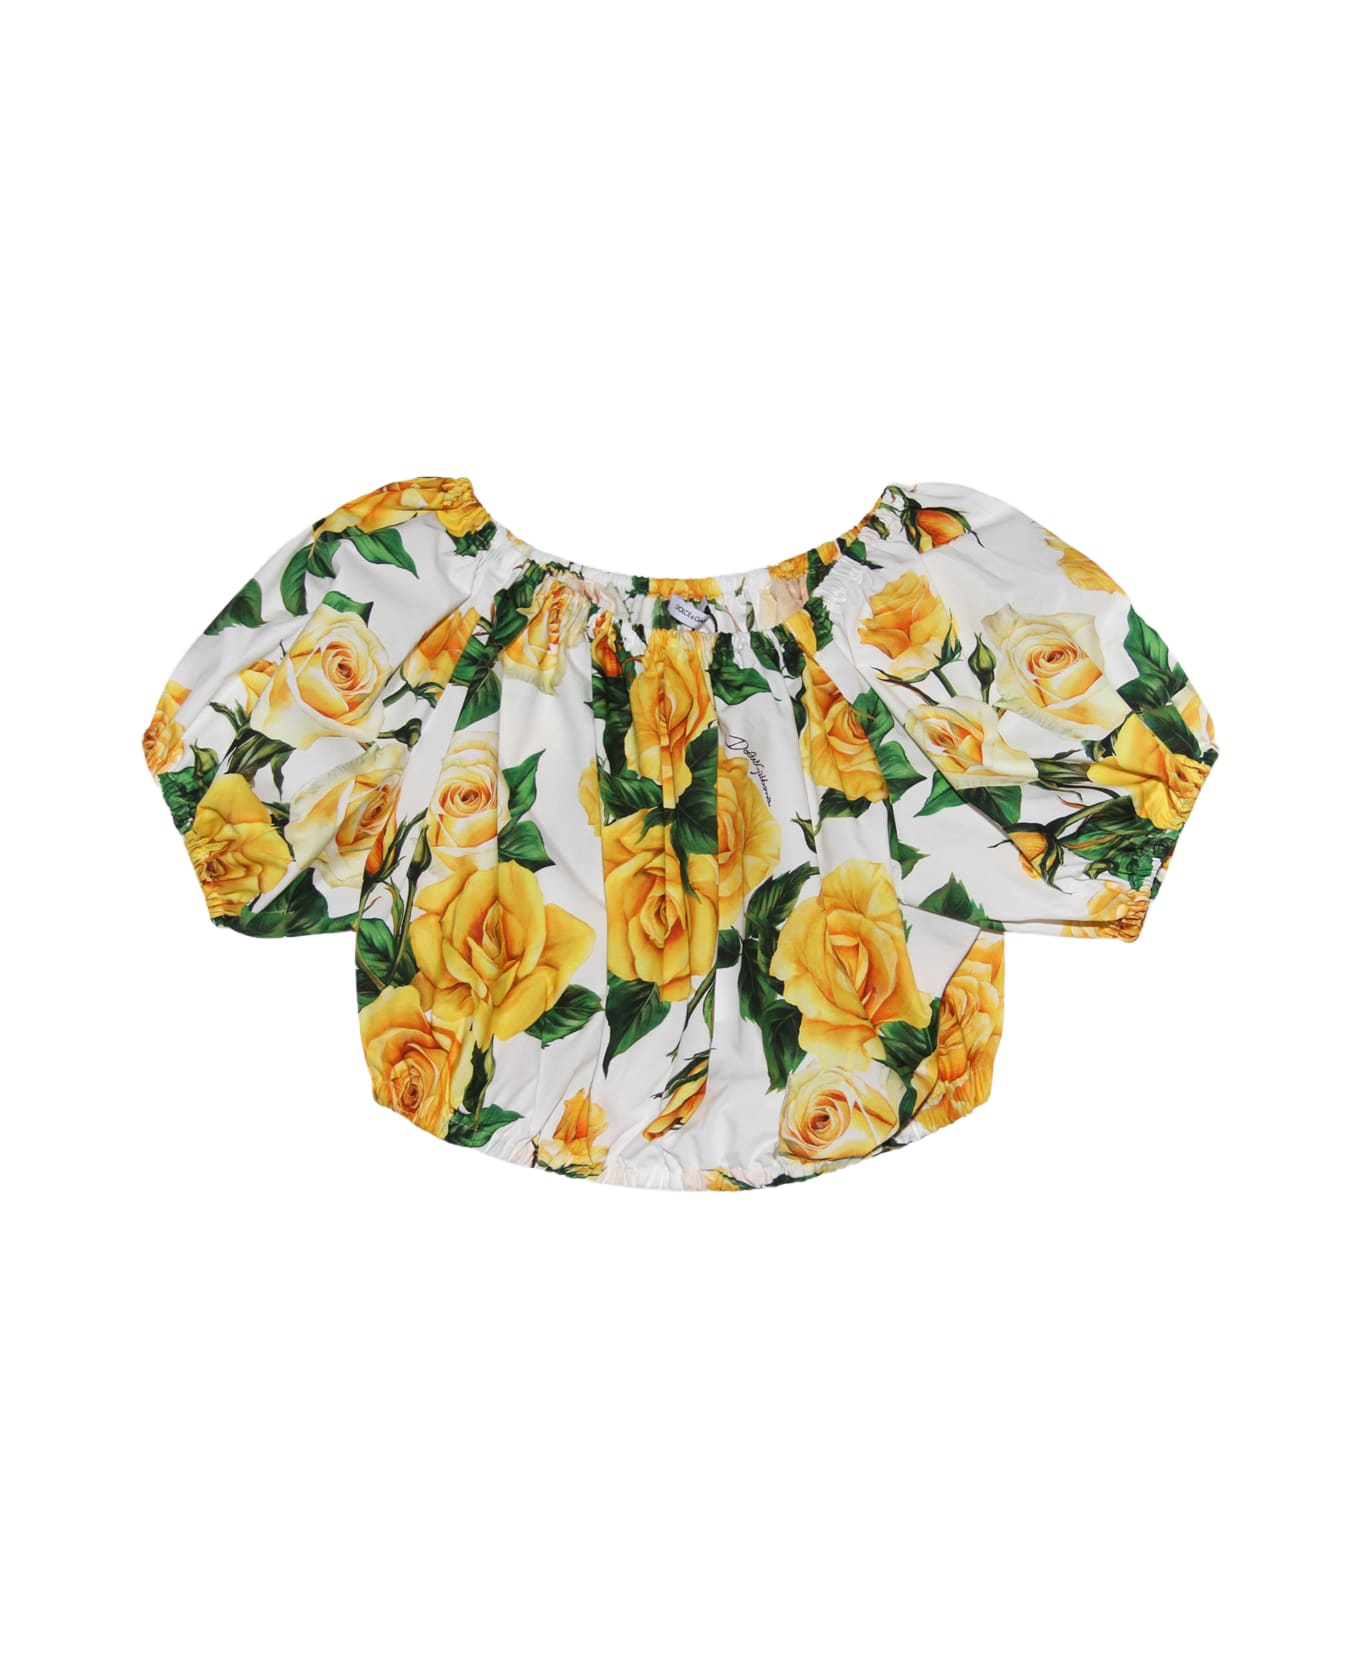 Dolce & Gabbana White, Yellow And Green Cotton Top - ROSE GIALLE F.DO BIANCO トップス